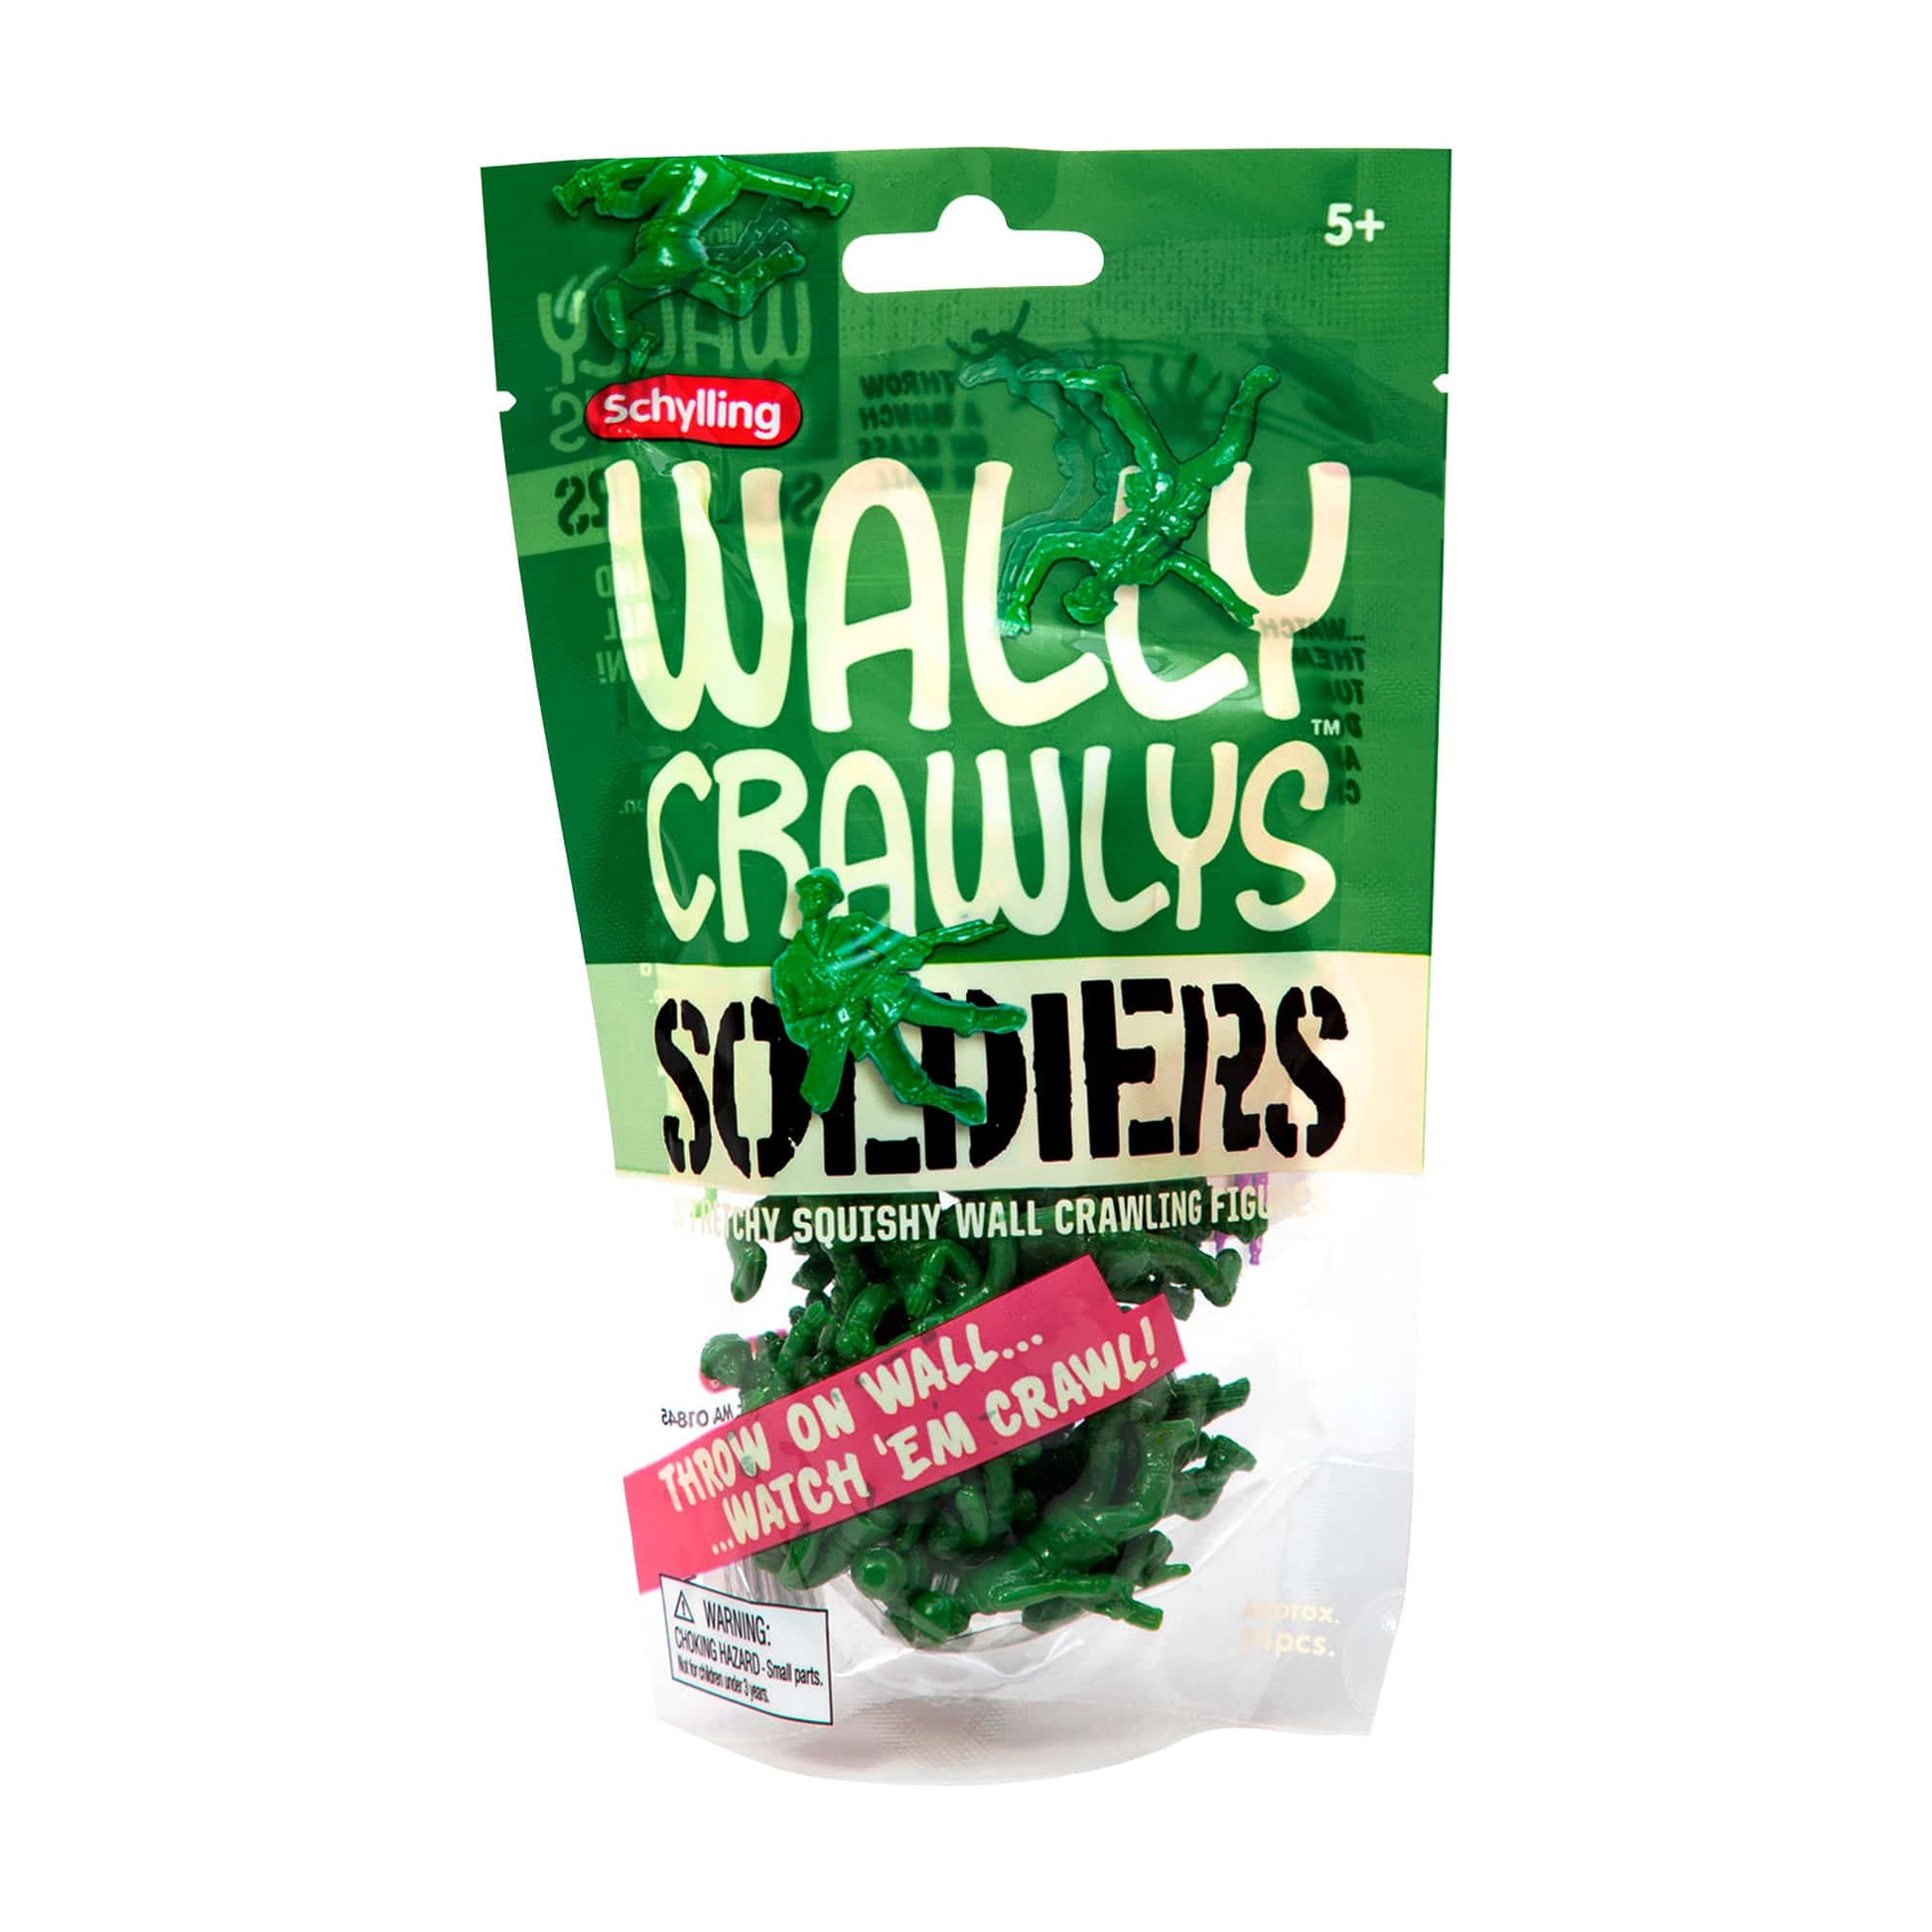 Wally Crawlys Soldiers